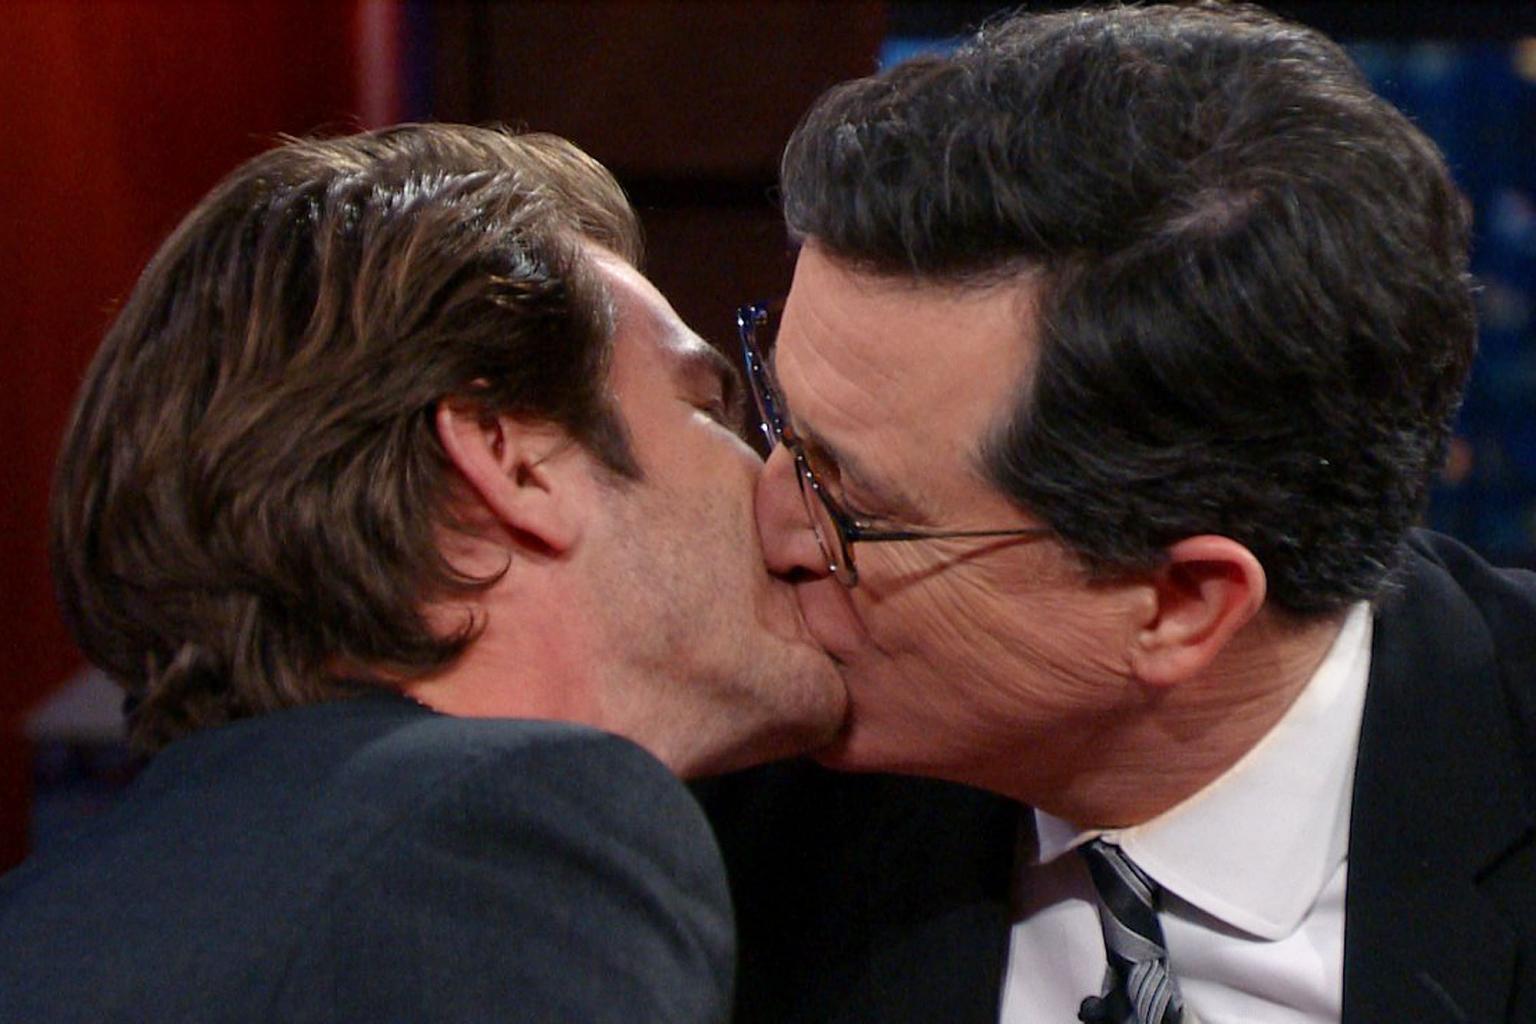 Andrew Garfield Opens Up About Ryan Reynolds Kiss      '  and Kisses Stephen Colbert!